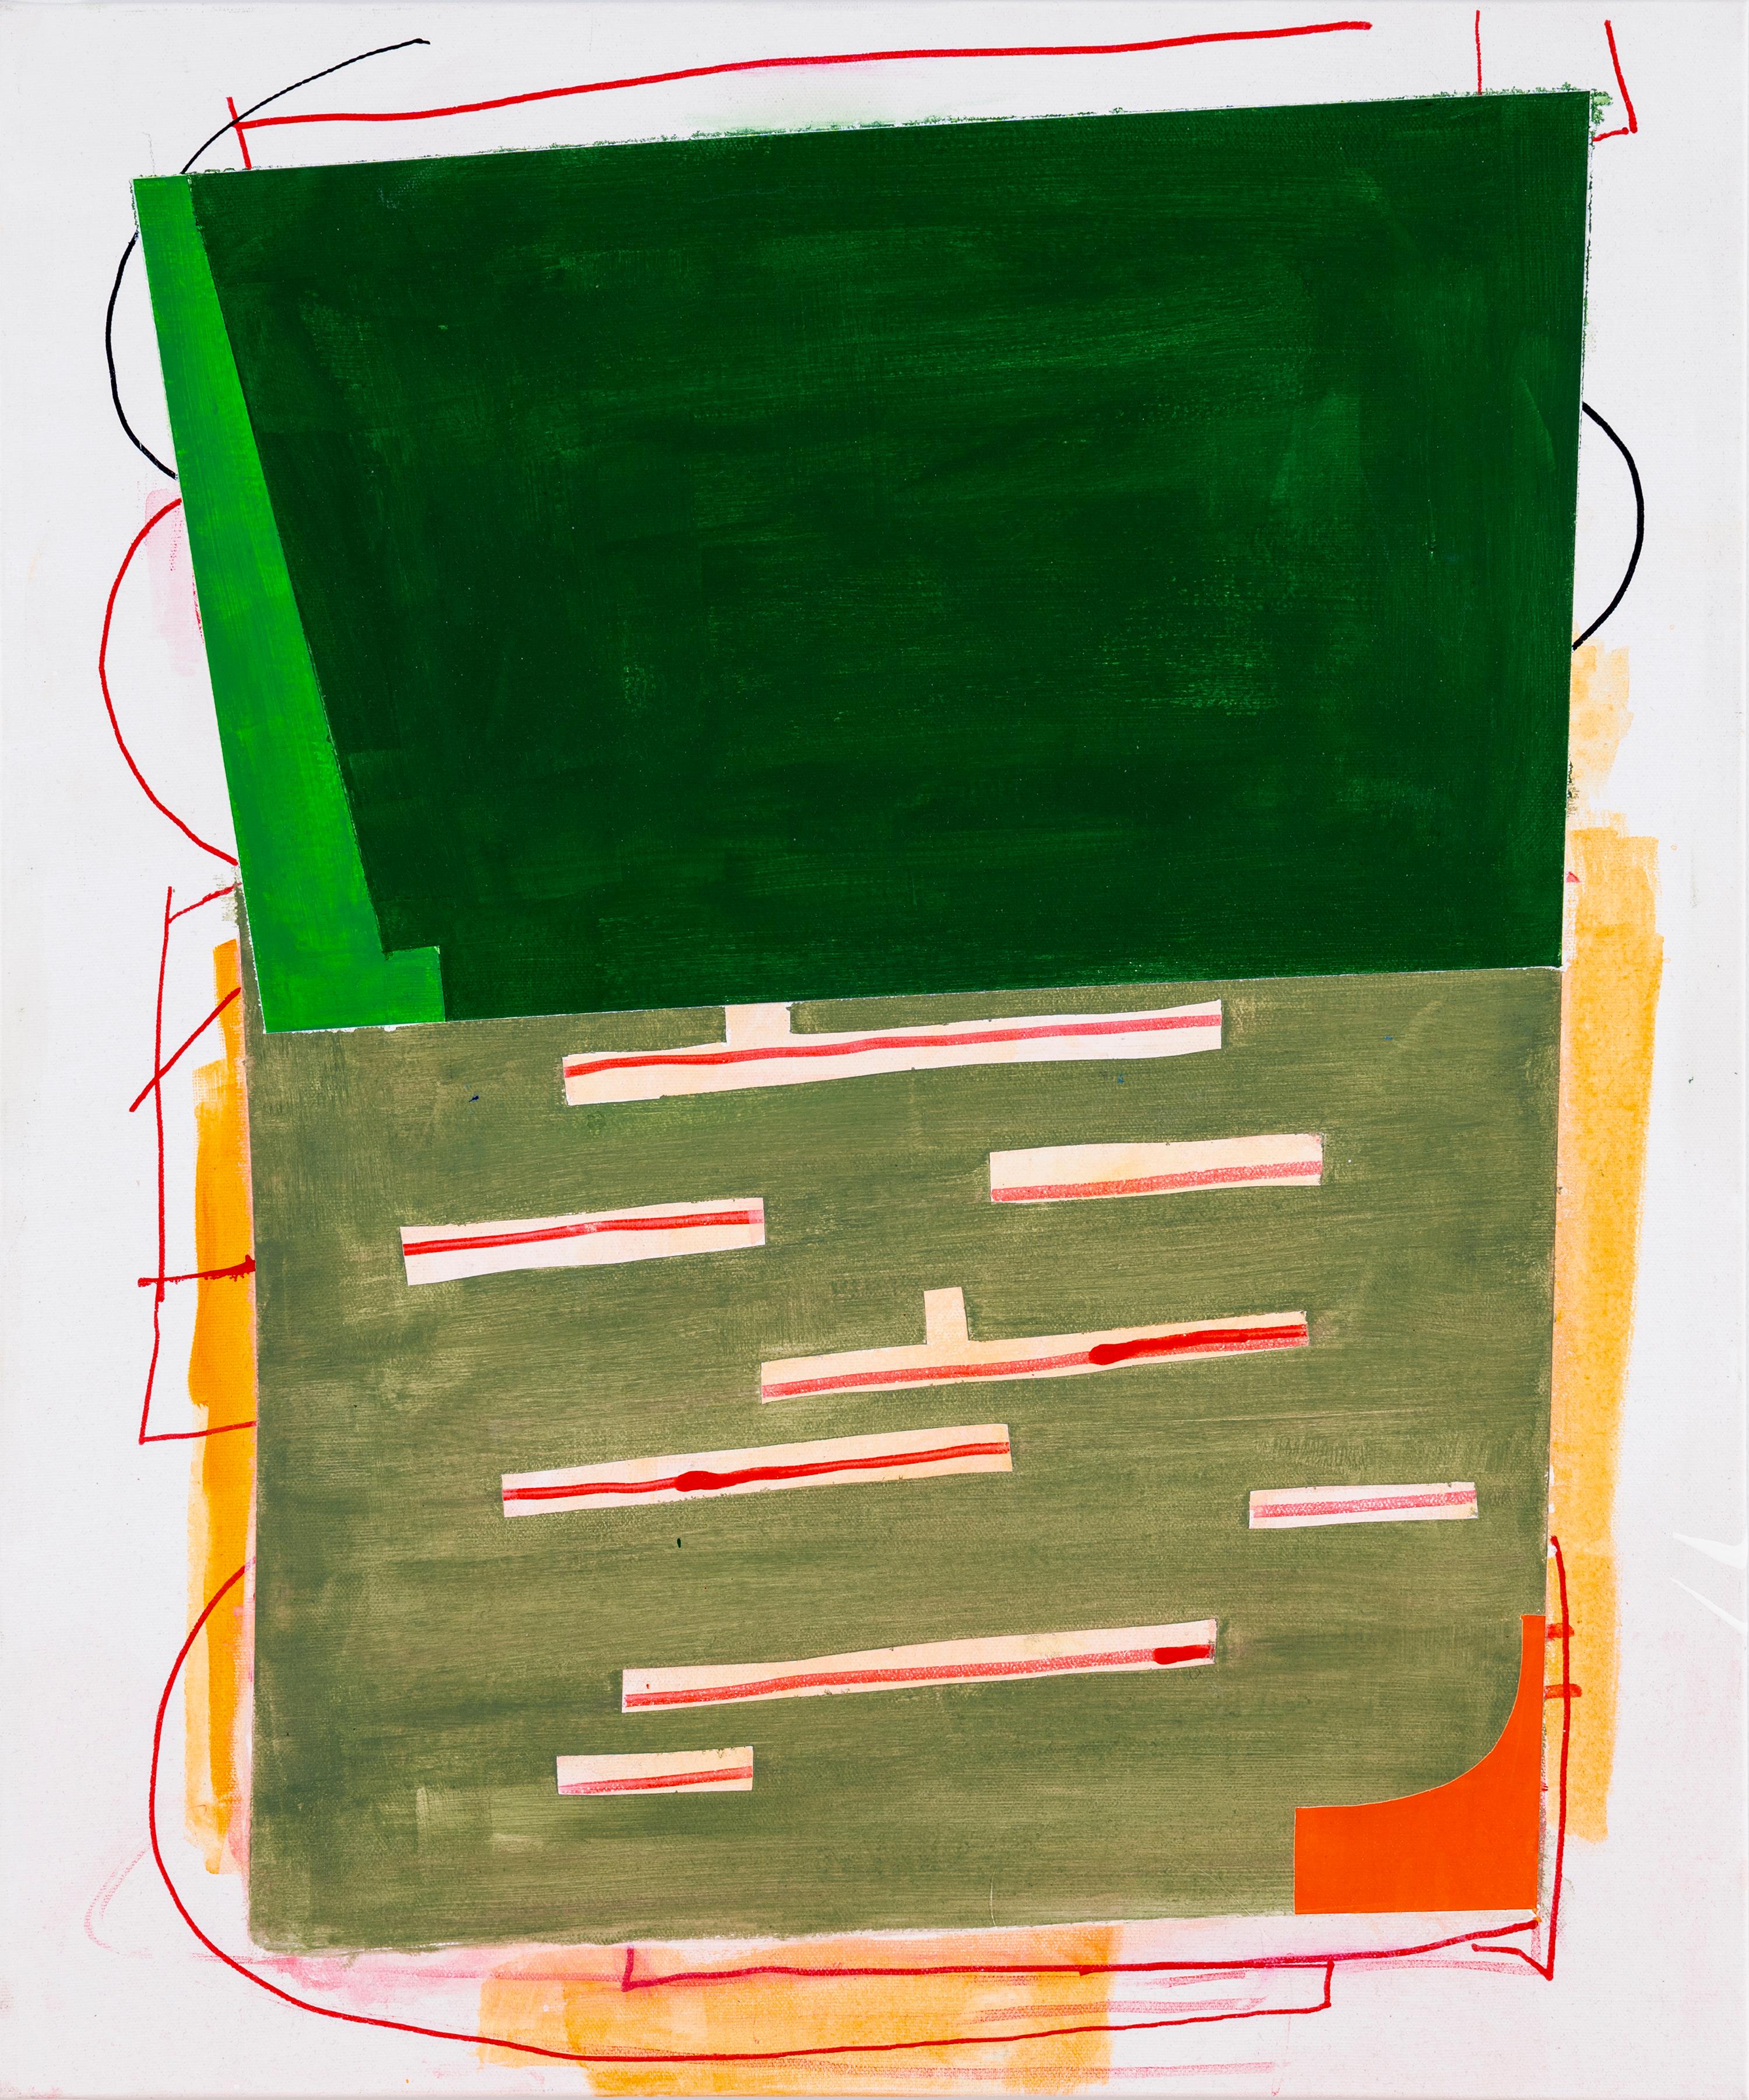 Margo Margolis Abstract Painting - "All the Greens" Playful Abstract Dark, Light, Olive Green - Orange, Red, Yellow